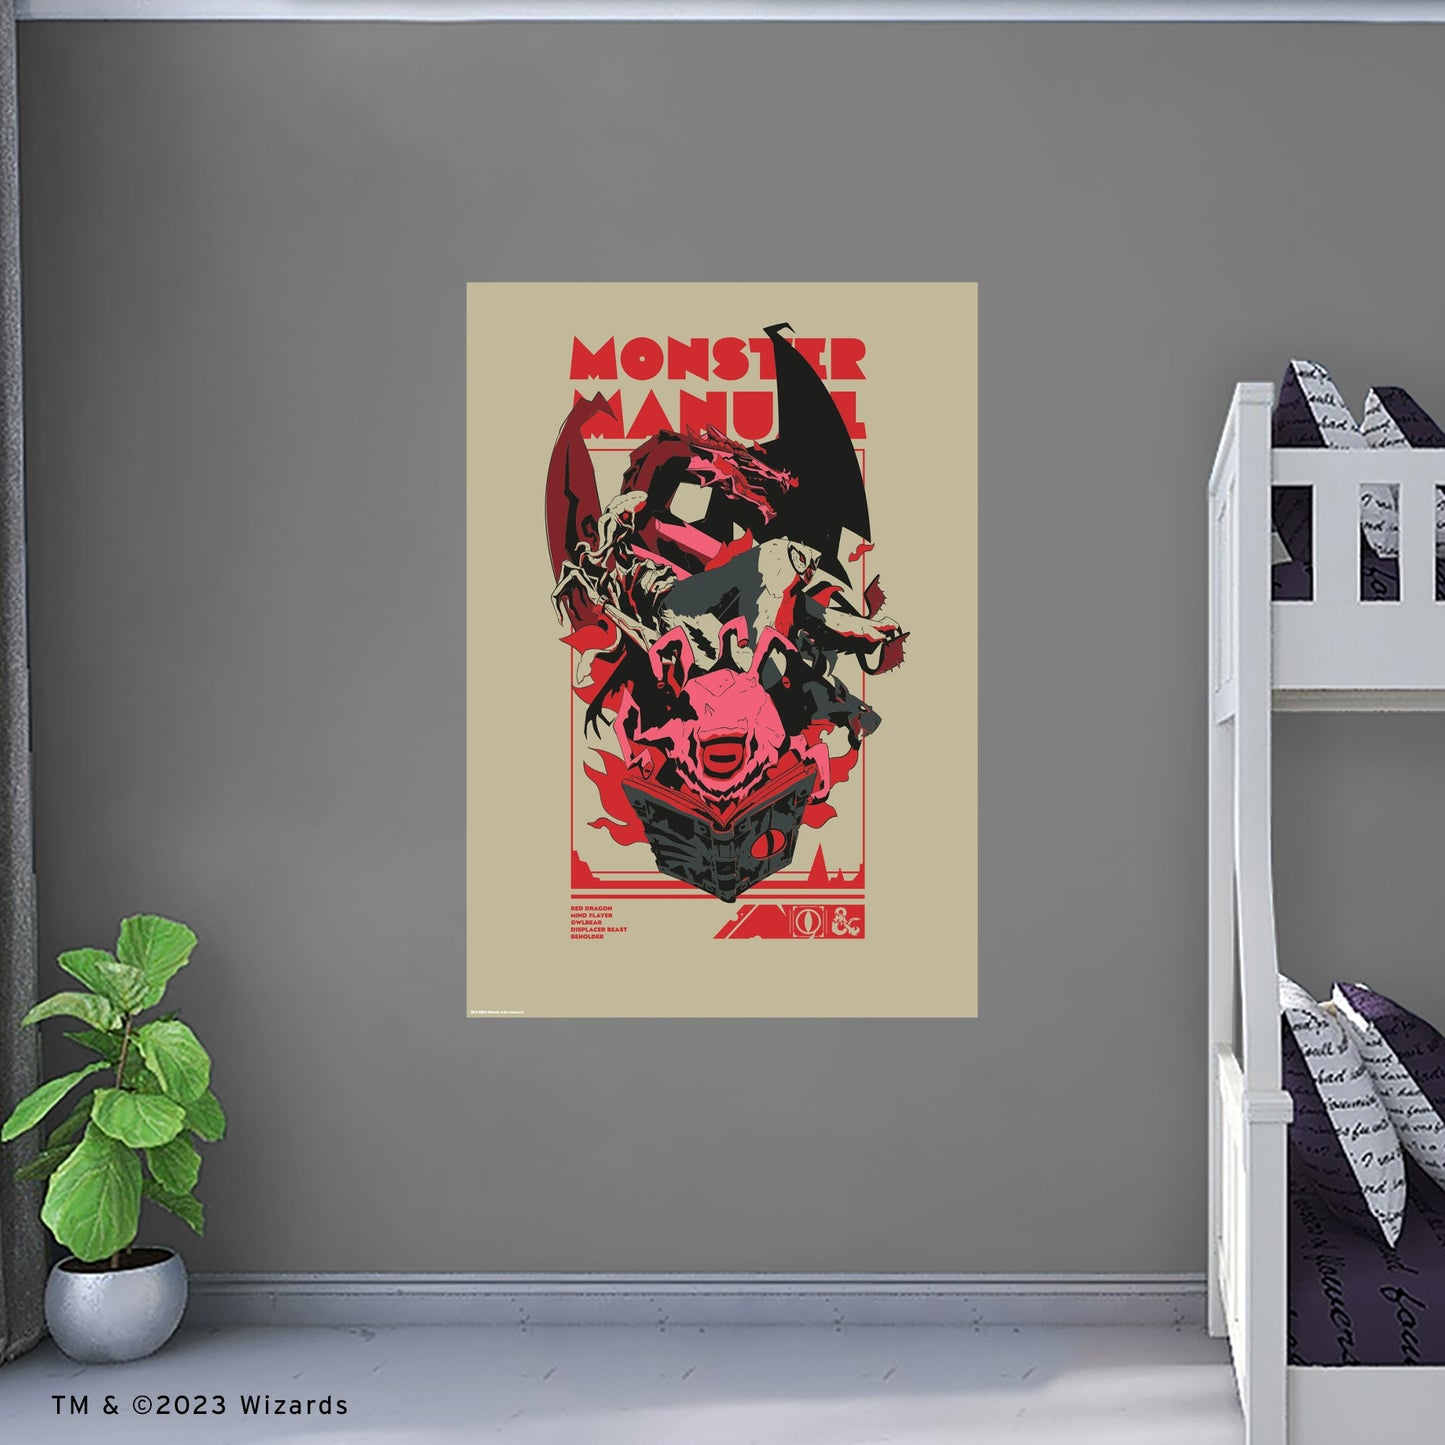 Dungeons & Dragons: Monster Manual Poster - Officially Licensed Hasbro Removable Adhesive Decal